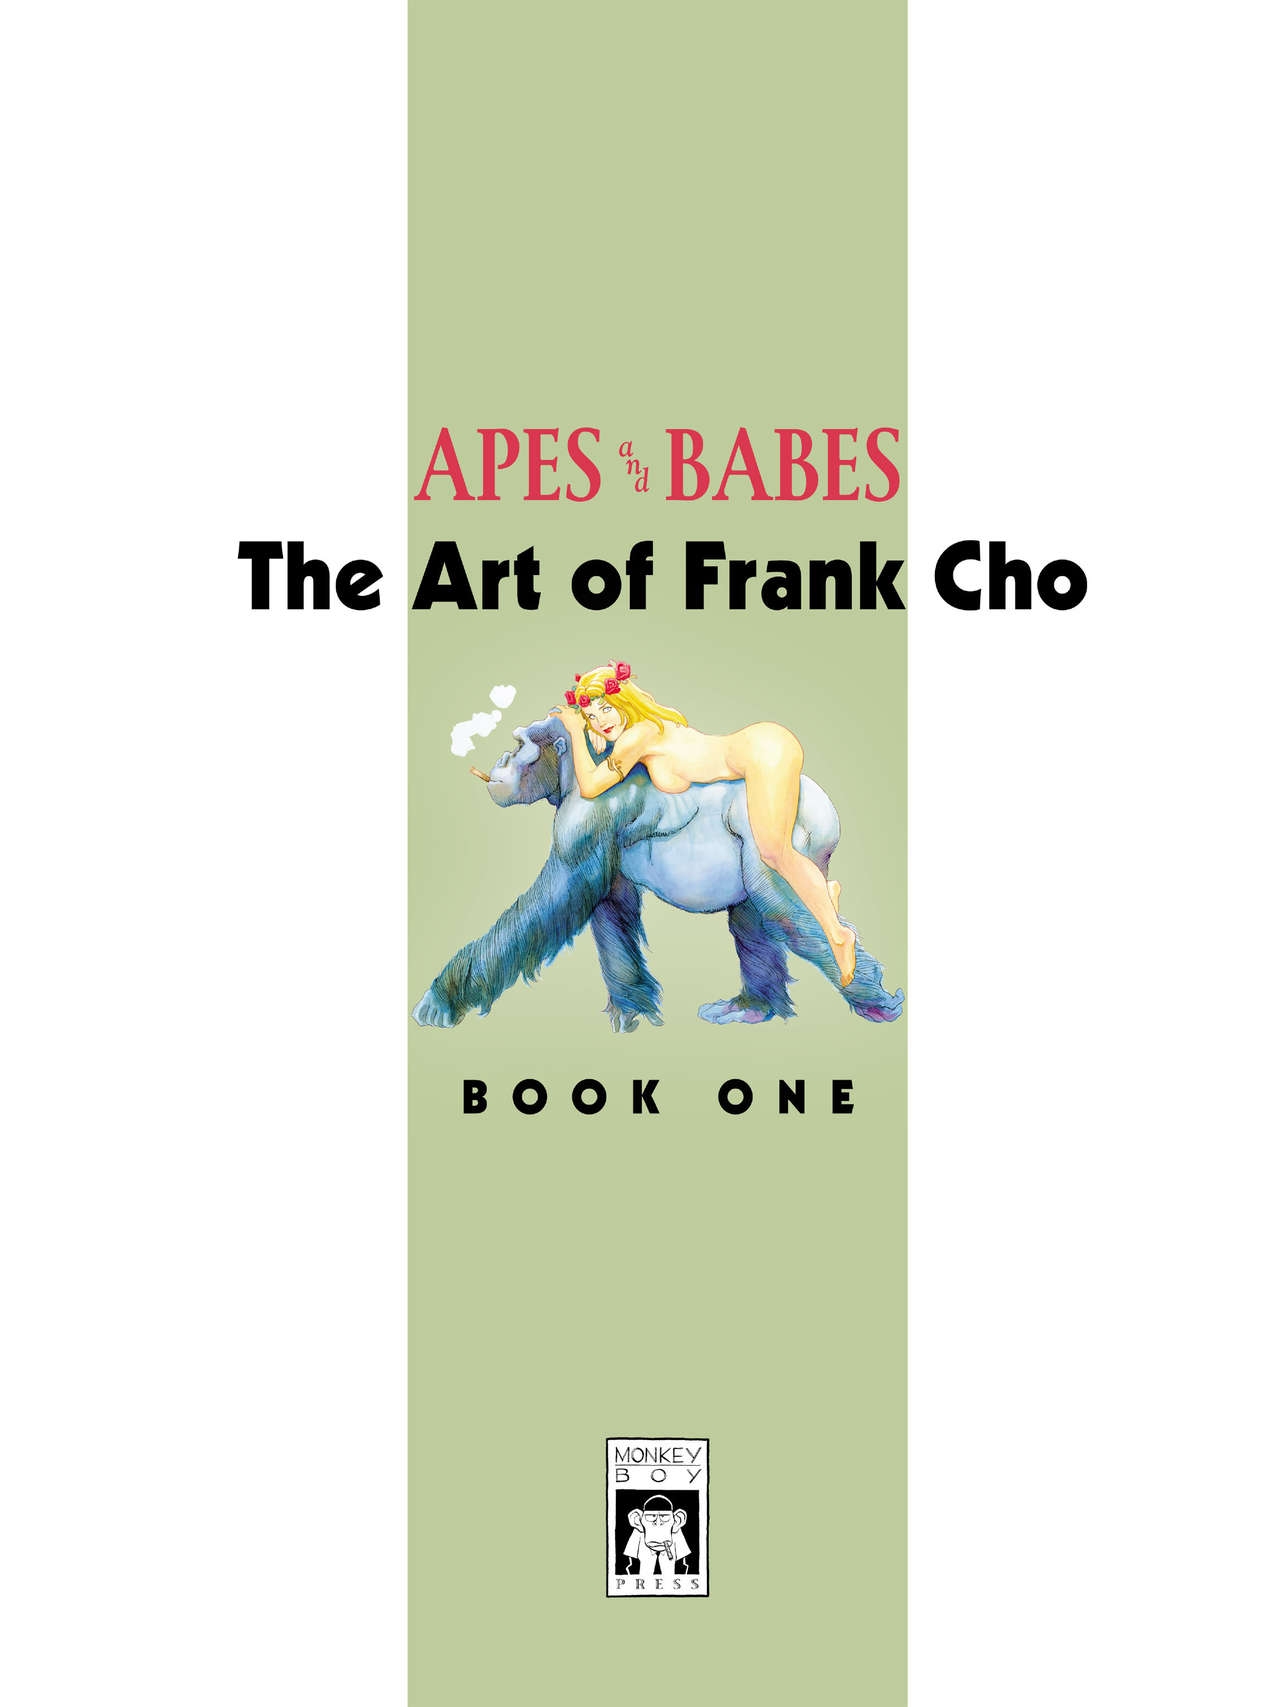 [Frank Cho] Apes & Babes: The Art Of Frank Cho 1